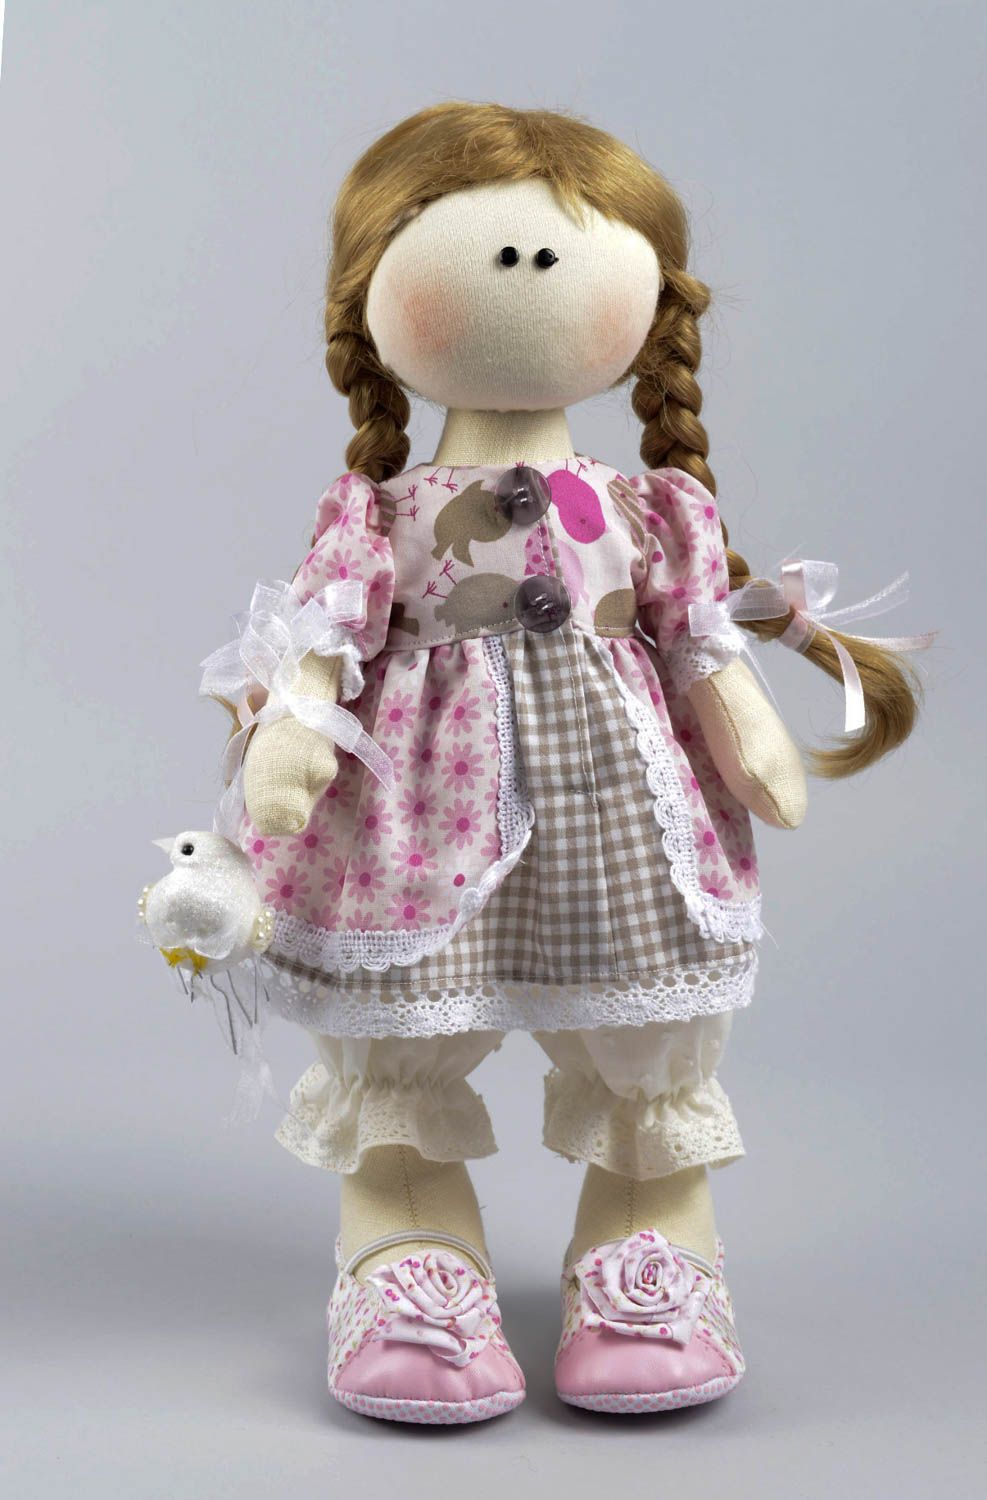 Beautiful handmade rag doll best toys for kids stuffed fabric toy gift ideas photo 1